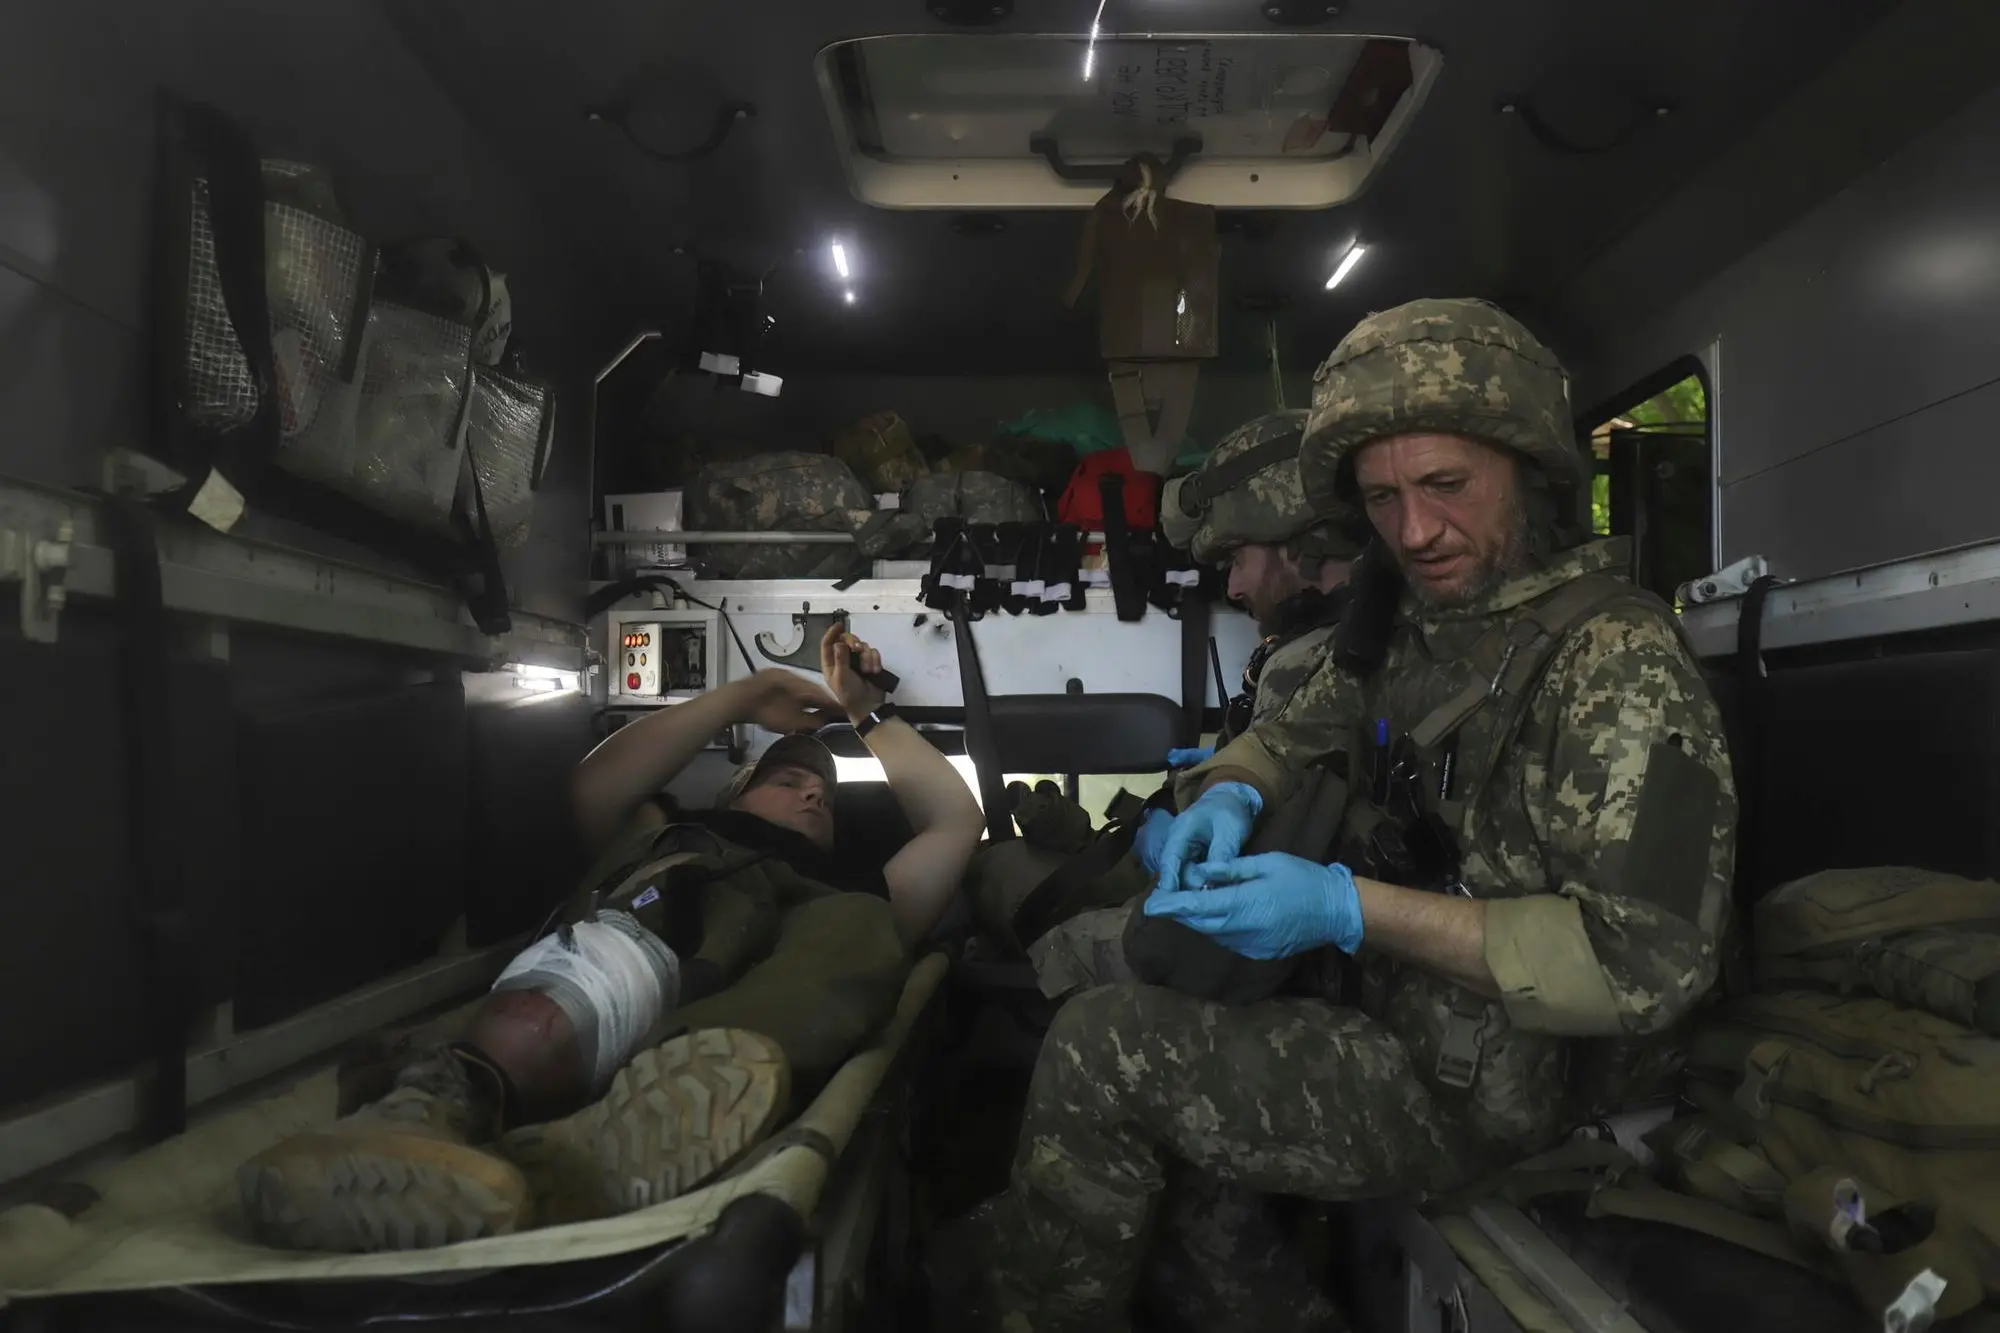 epa10006872 A military medic gives first aid to an injured Ukrainian serviceman close to a front line near the small city of Svitlodarsk of Donetsk area, 10 June 2022 amid heavy fighting in that region in the last days. Russian troops entered Ukrainian territory on 24 February causing fighting and destruction and a humanitarian crisis. According to the UNHCR, more than 6.9 million refugees have fled Ukraine, and a further 7.7 million people have been displaced internally within Ukraine since. EPA/STR